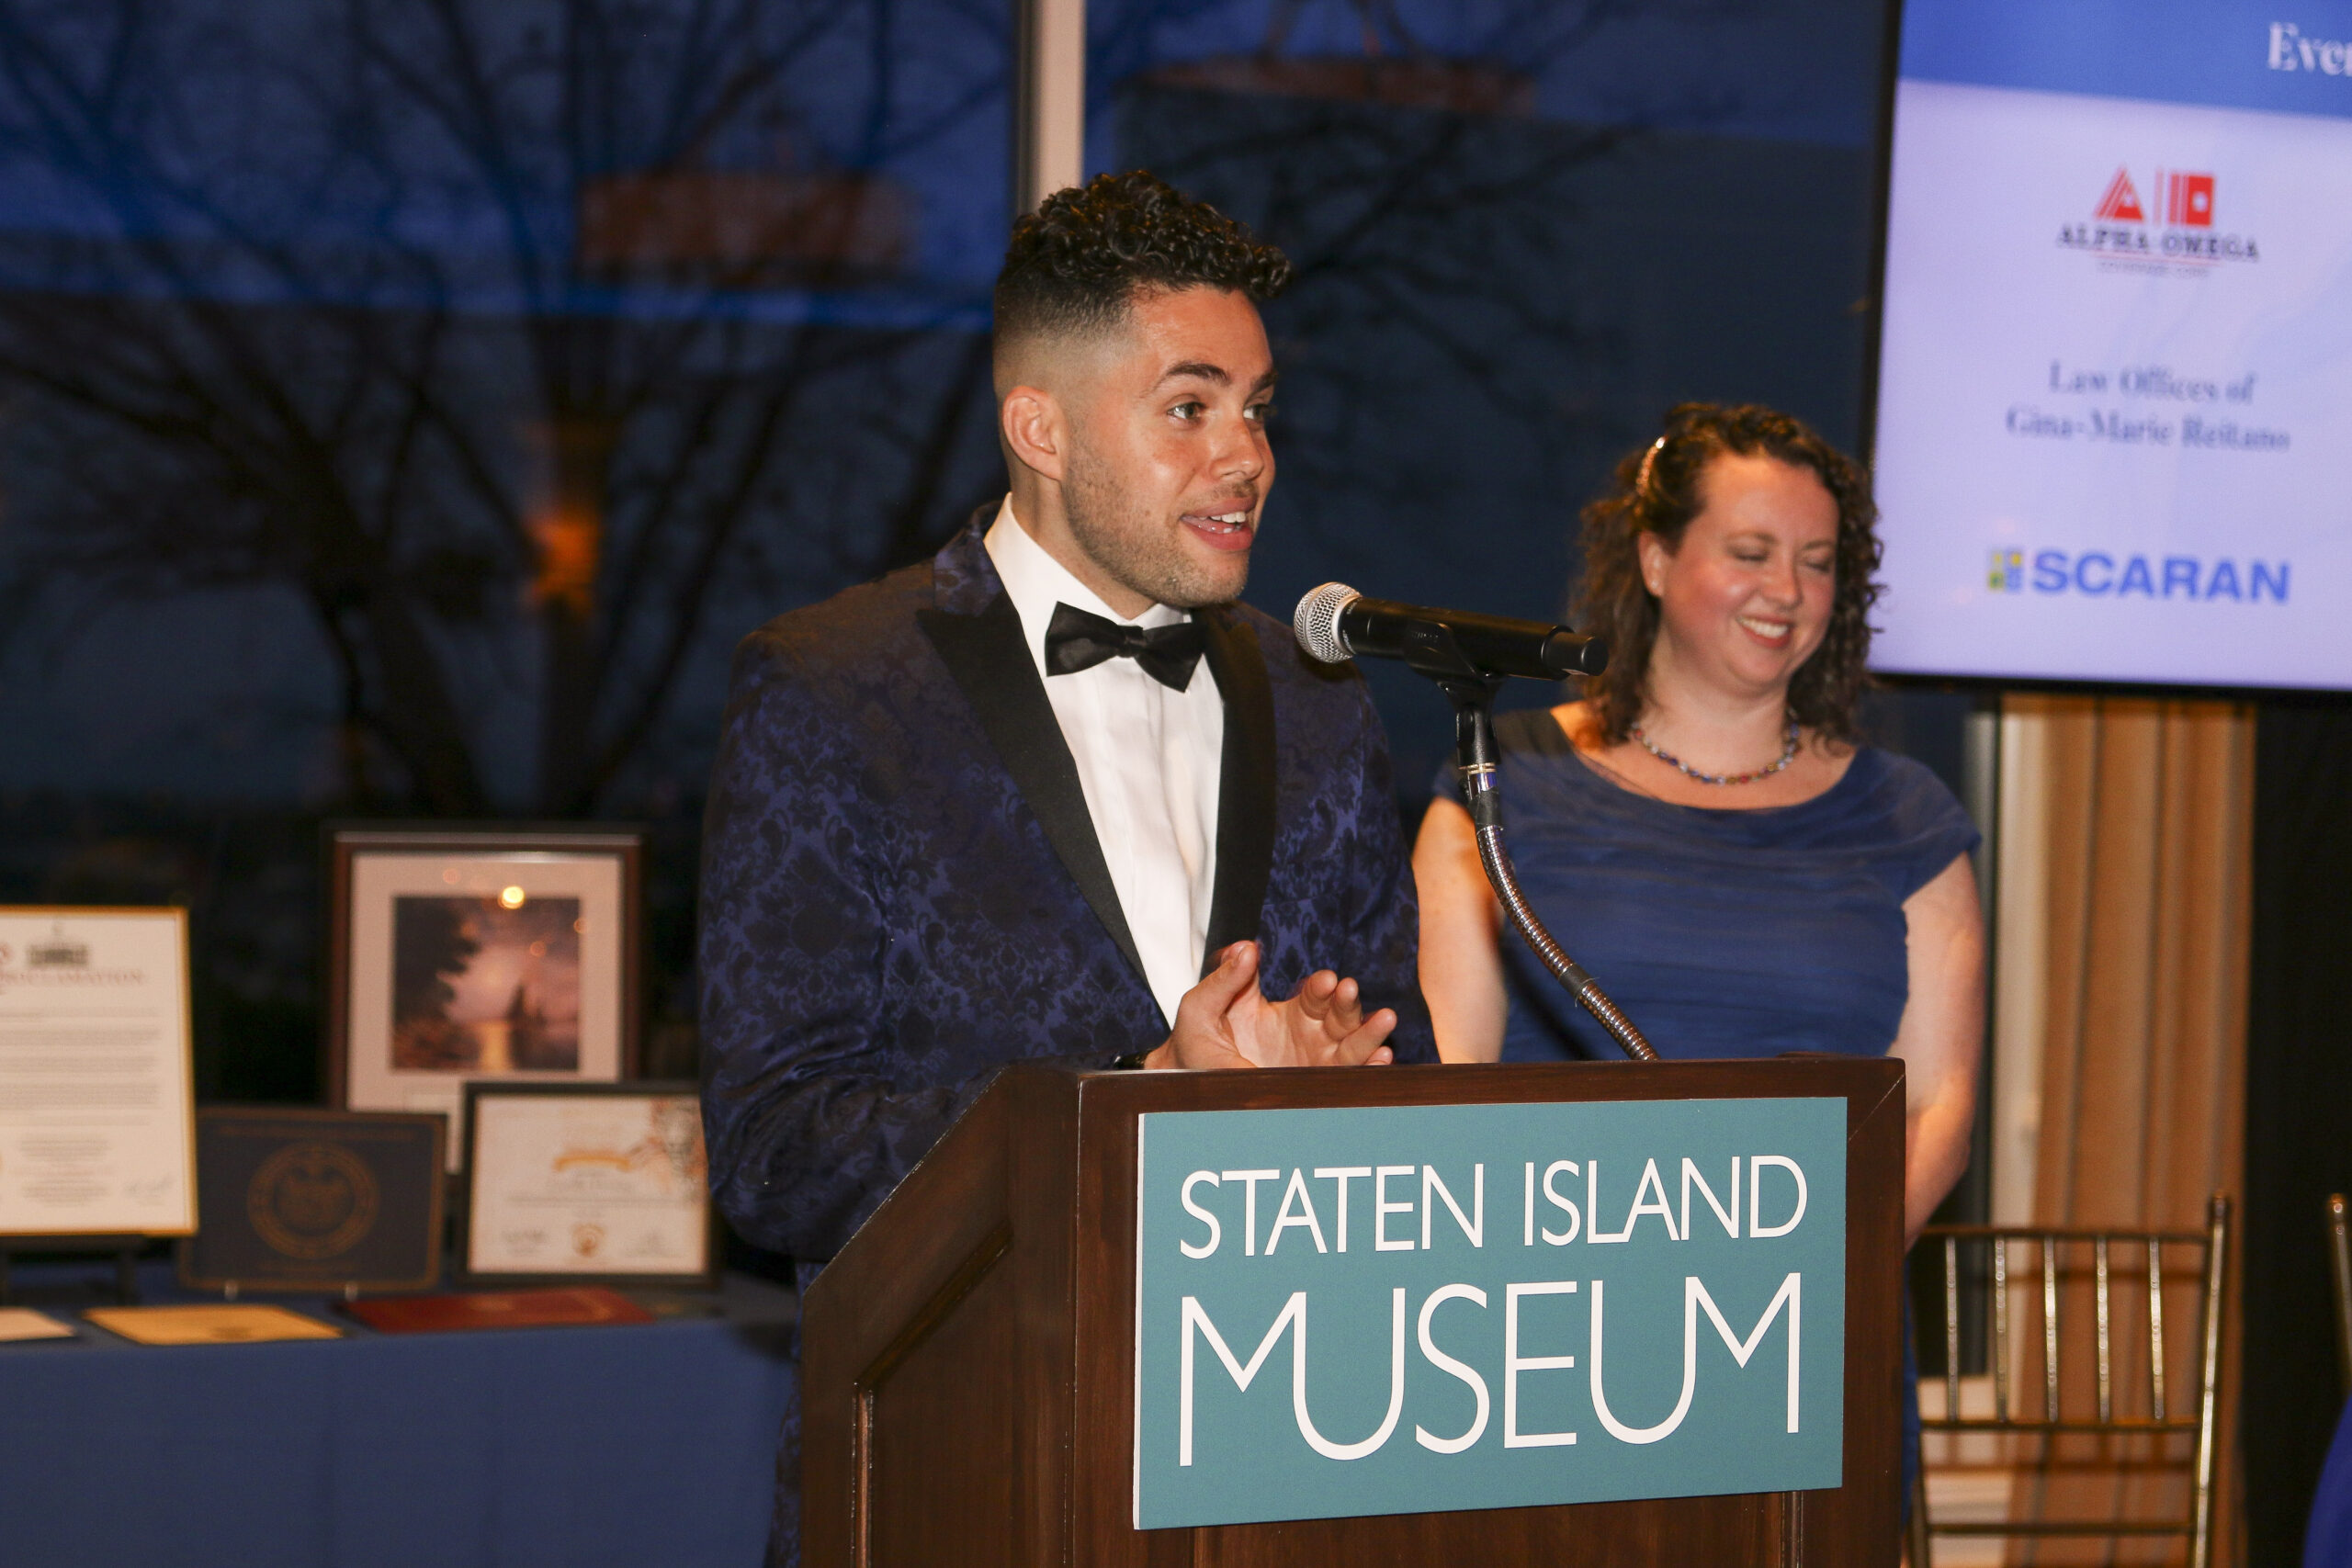 Staten Island Museum Trustee Niles French at the podium